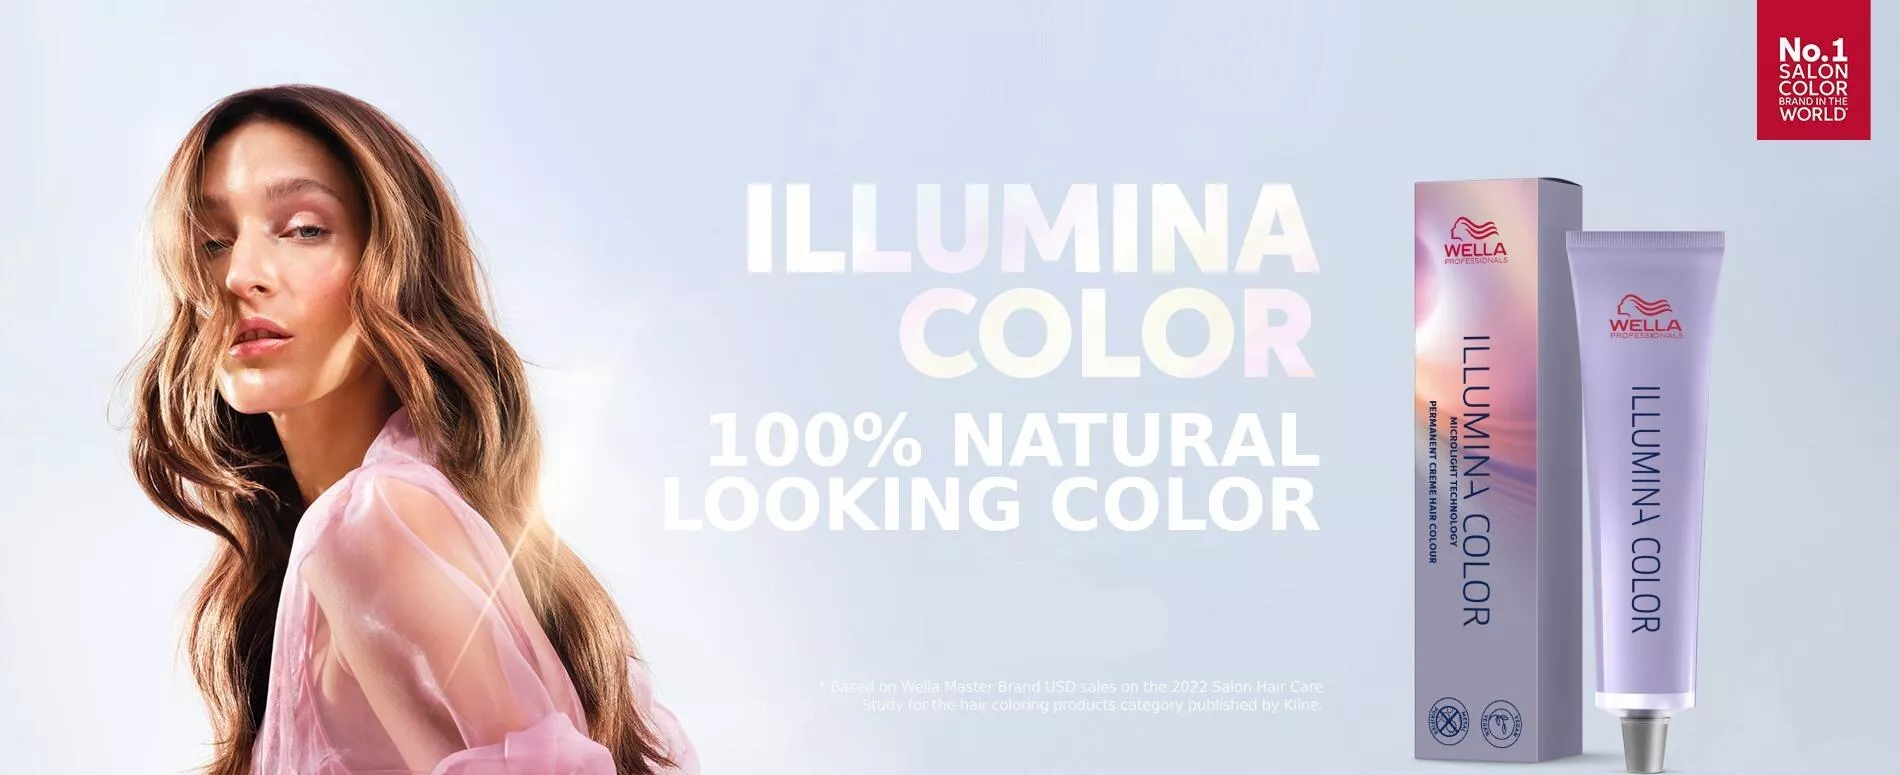 Illumina color banner with new packaging and new brunette model with 100% natural looking color